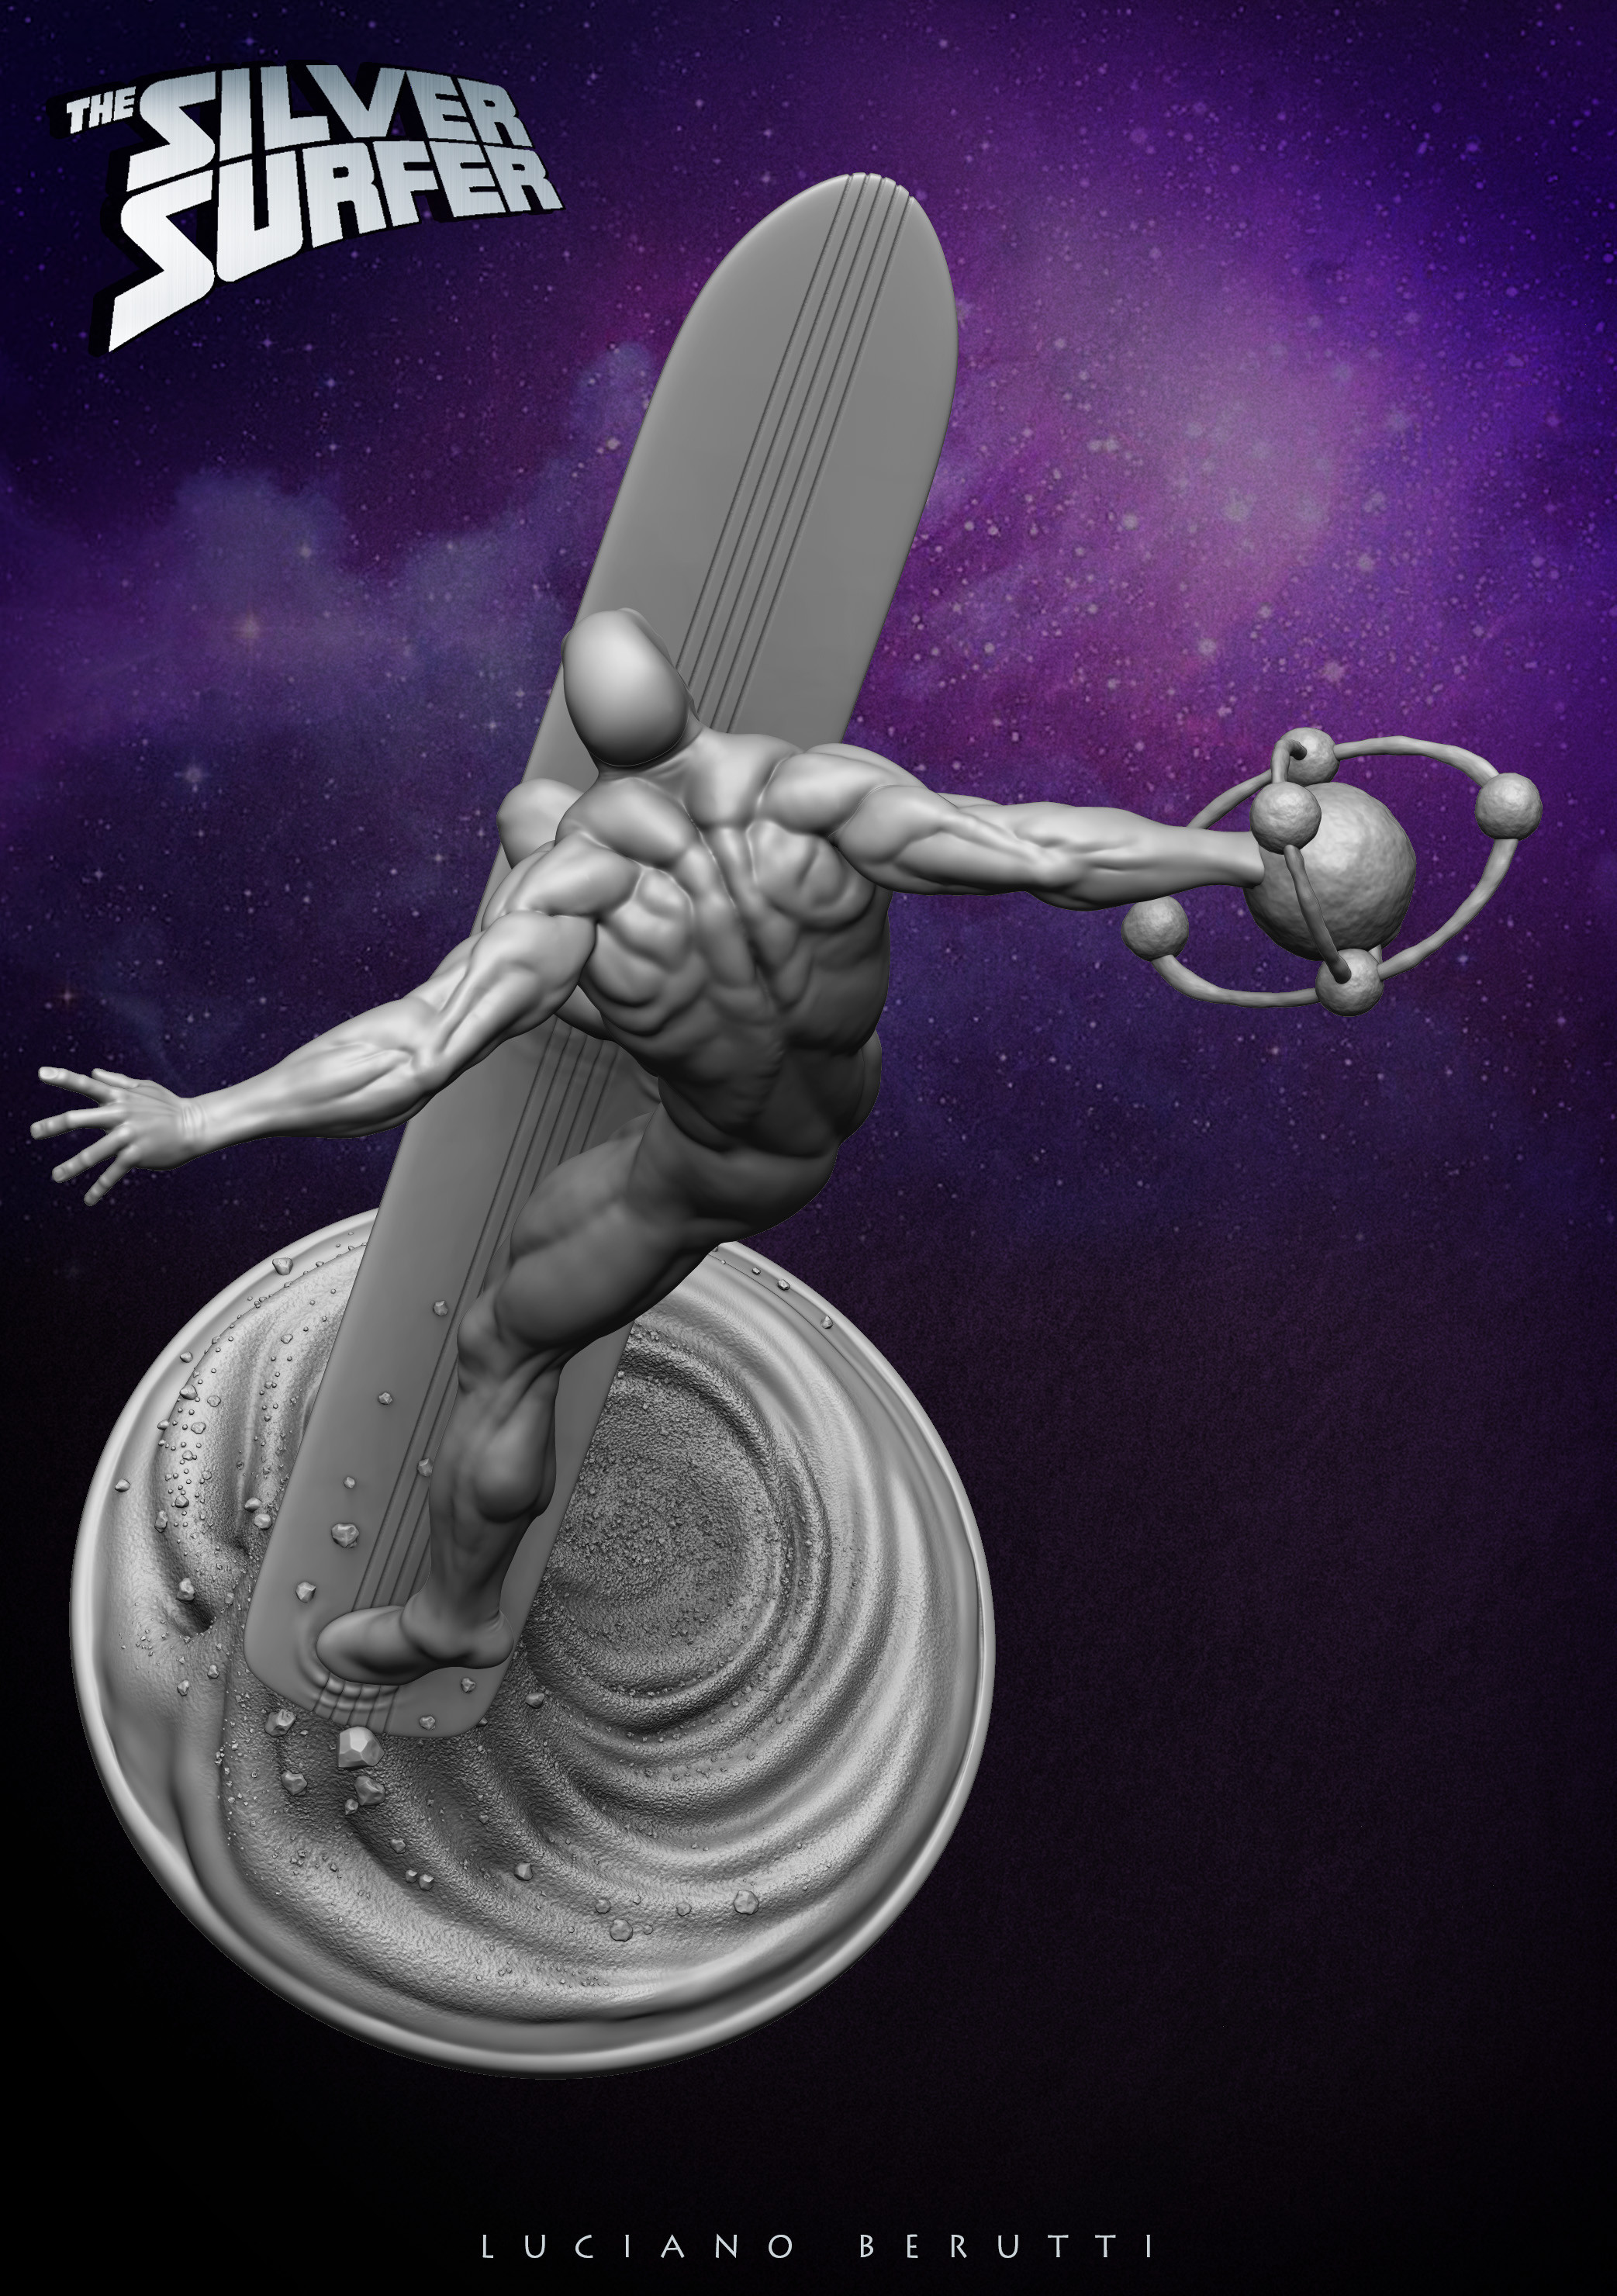 Silver Surfer Fan art - Collectible Statue - comission work.